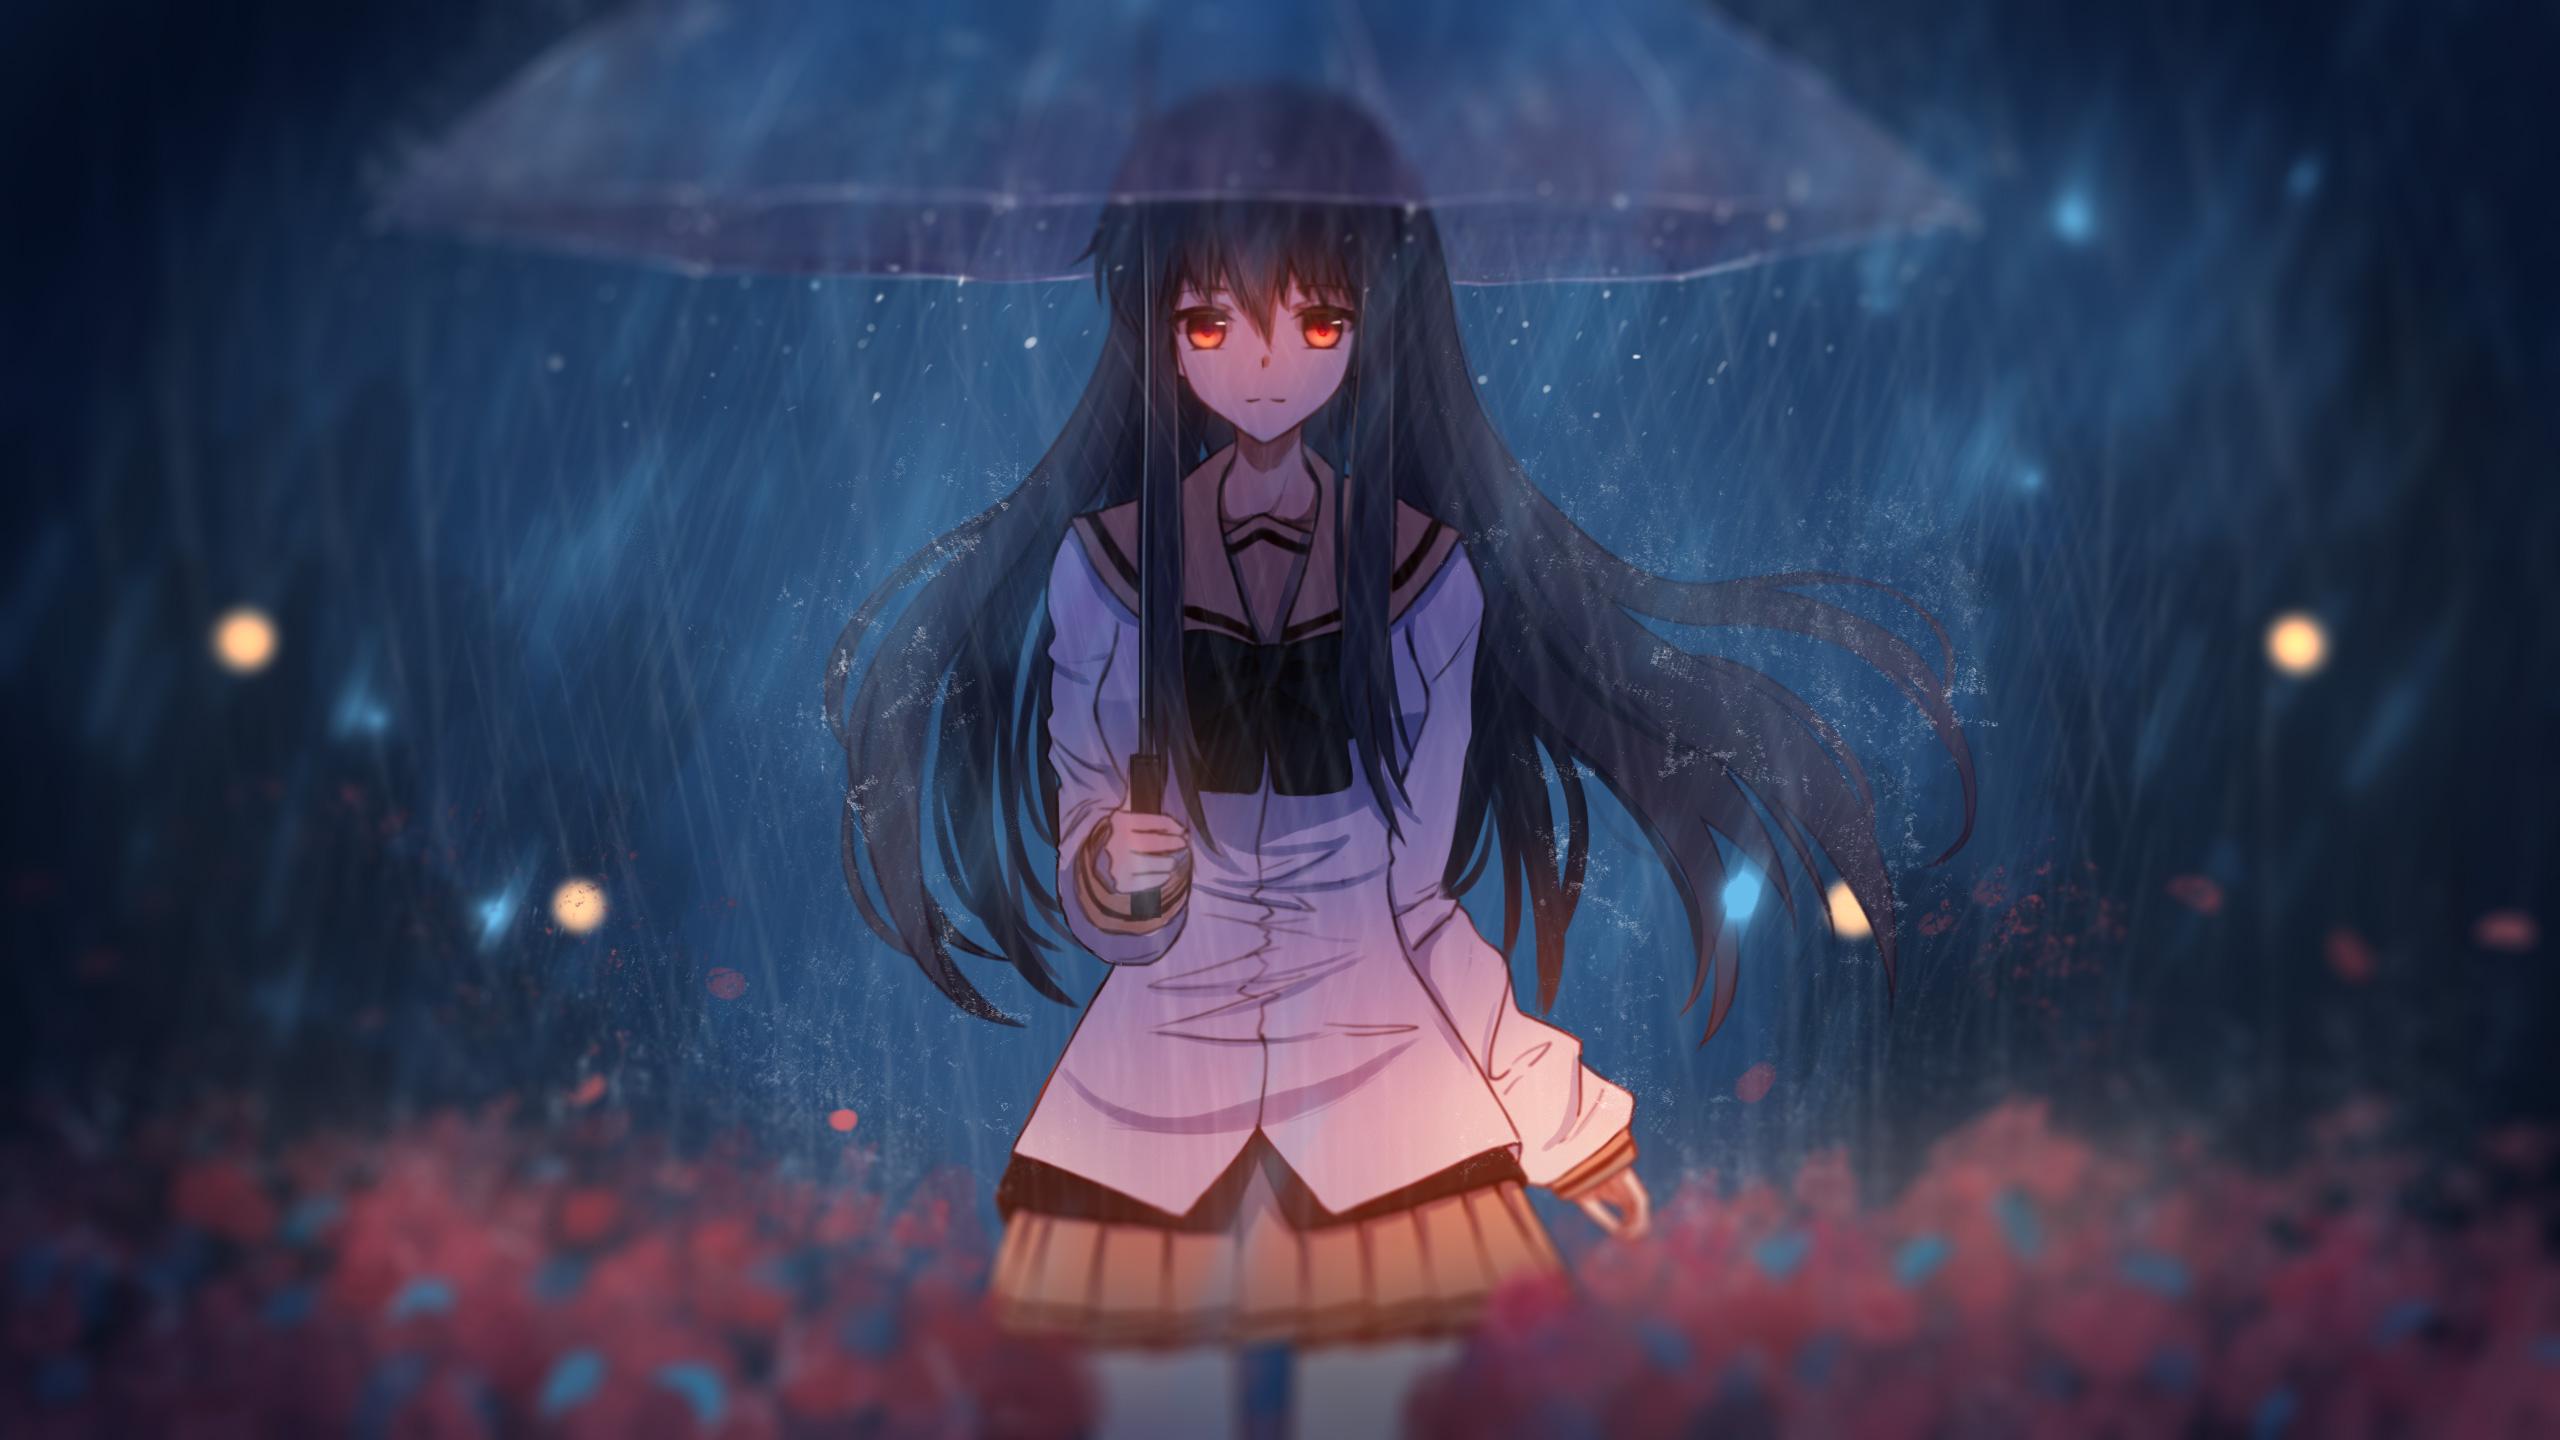 Anime Girl With Umbrella Art, HD Anime, 4k Wallpaper, Image, Background, Photo and Picture